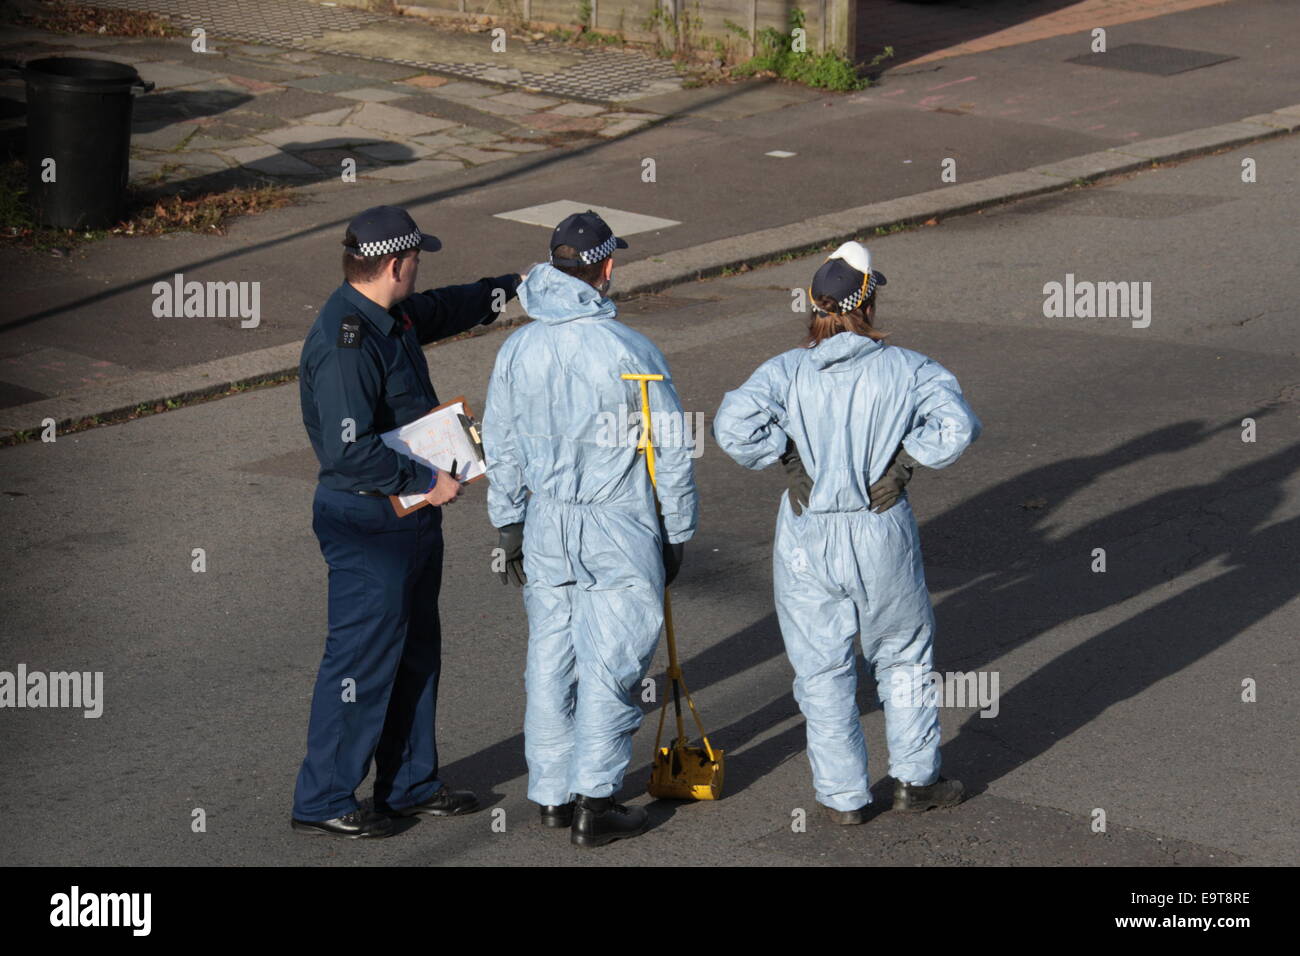 Ilford, London, UK. 01st Nov, 2014. Man found dead after woman murdered in Ilford on Friday evening. A young woman was stabbed to death on Valetines Road in Ilford at around 17:30 Friday 31/10/14. Some 90 minutes later a male was found collapsed in AucklandRd.,  Ilford it is understood his death is related to the earlier stabbing. The dead man's death is not being treated as suspicious. A large crime scene cordon was put in place resulting in significant disruption to local residents Friday night and into Saturday afternoon as police searched local gardens for clues. © HOT SHOTS/Alamy Live New Stock Photo